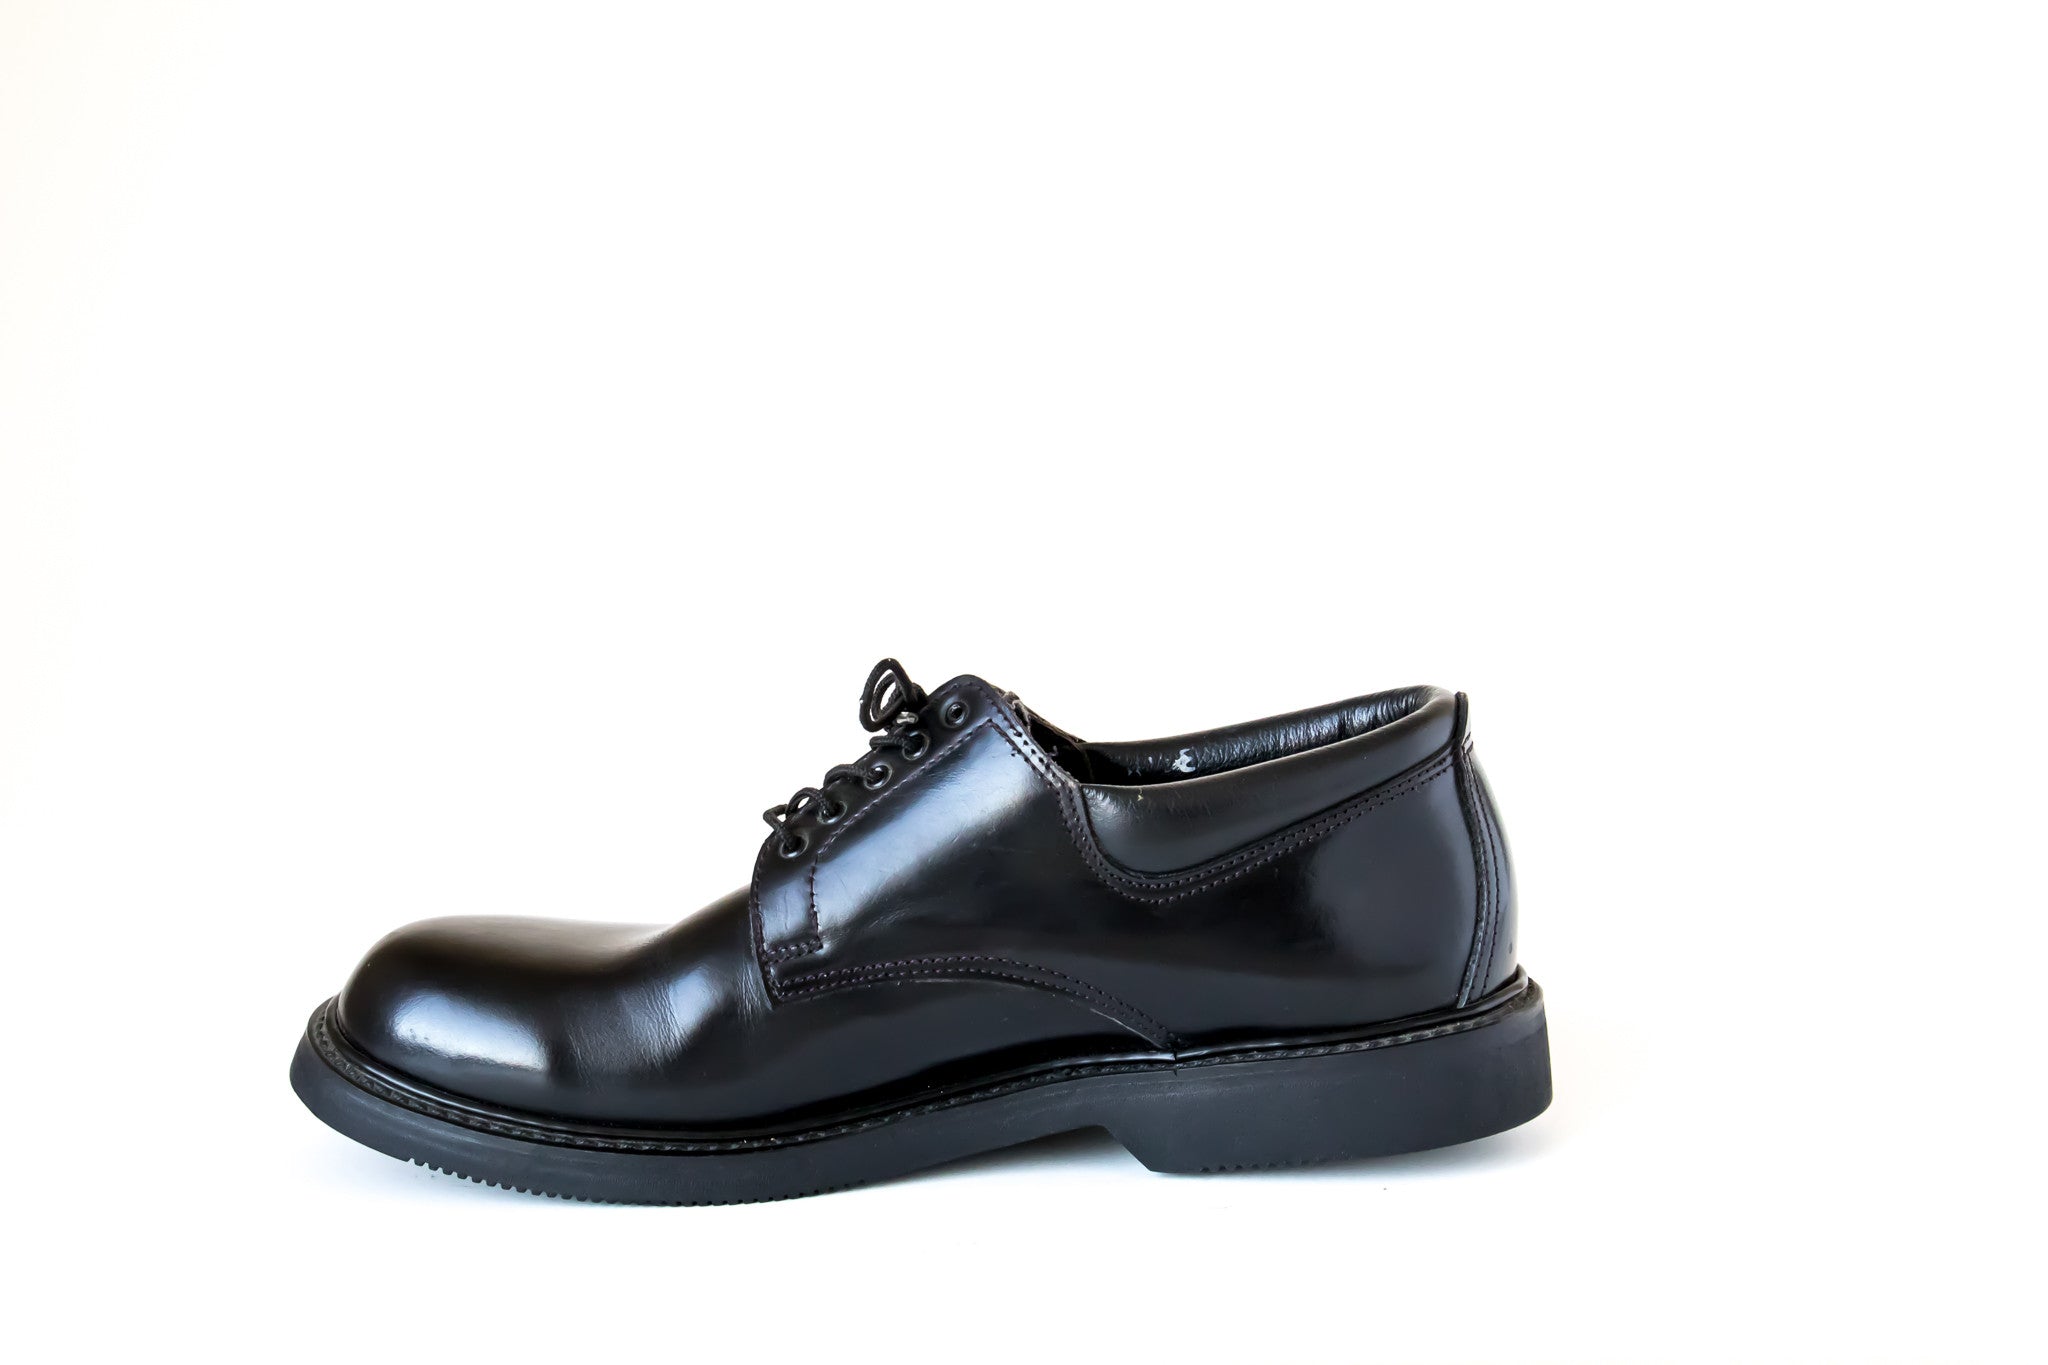 OX 600 - Classic Leather Oxford